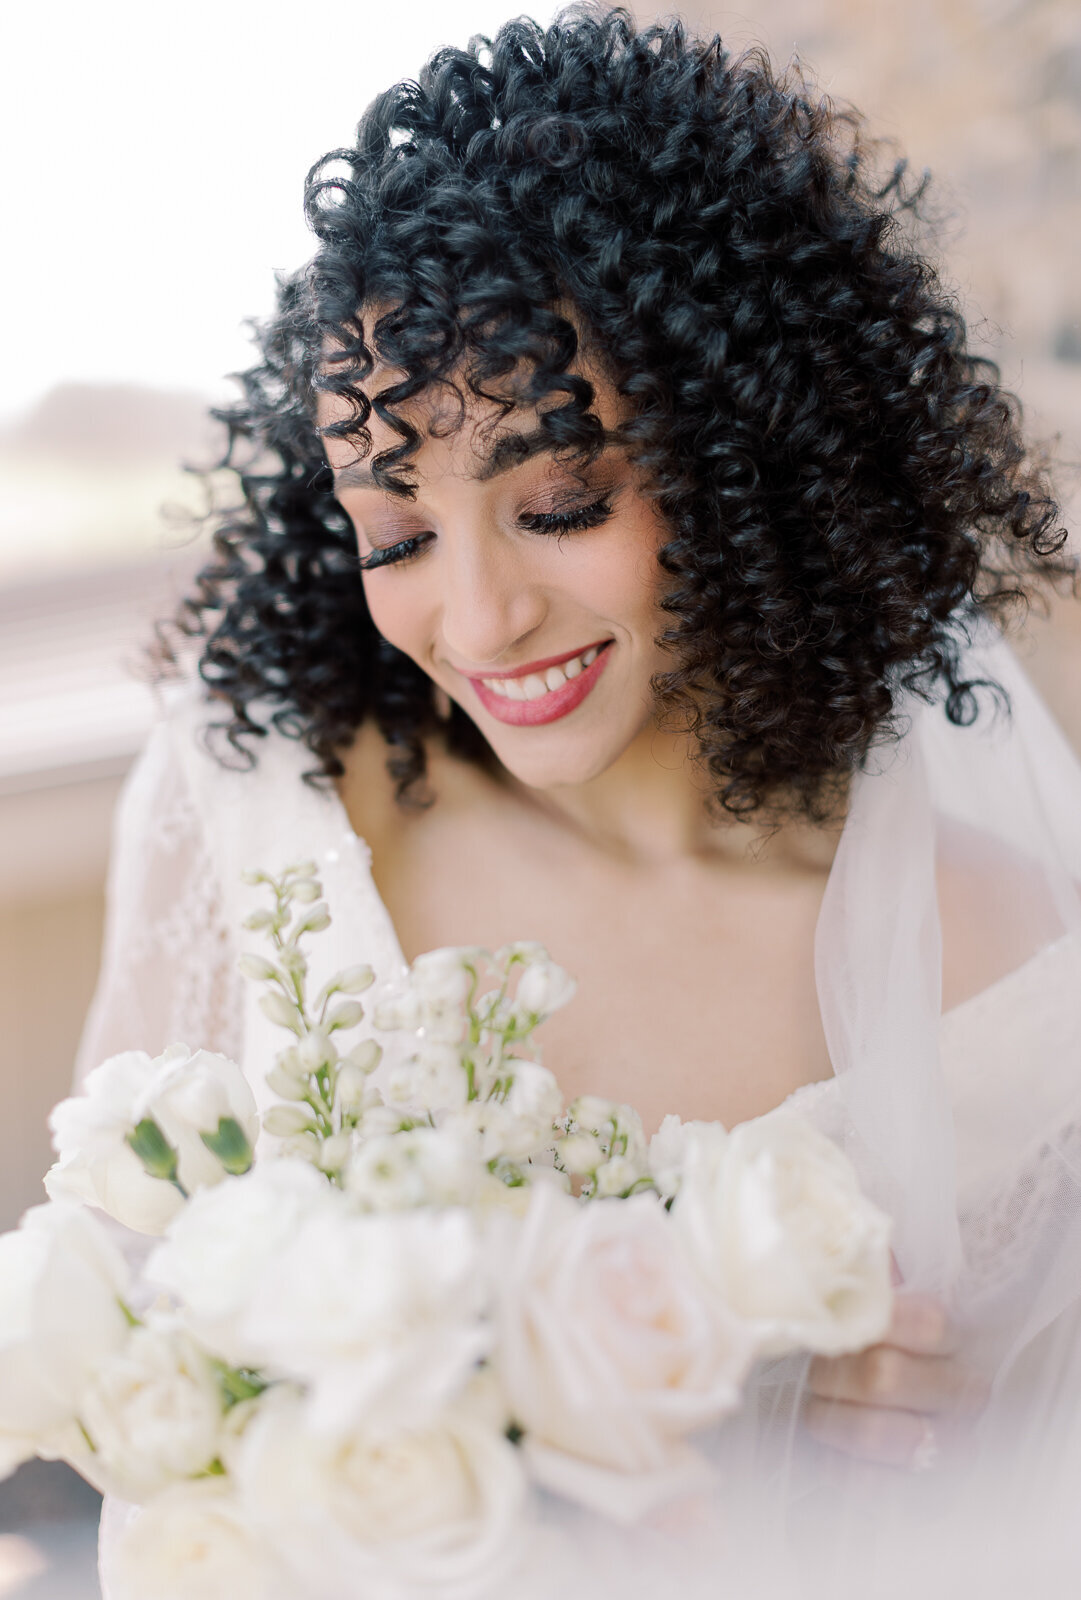 Bride with curly hair poses for bridal portraits